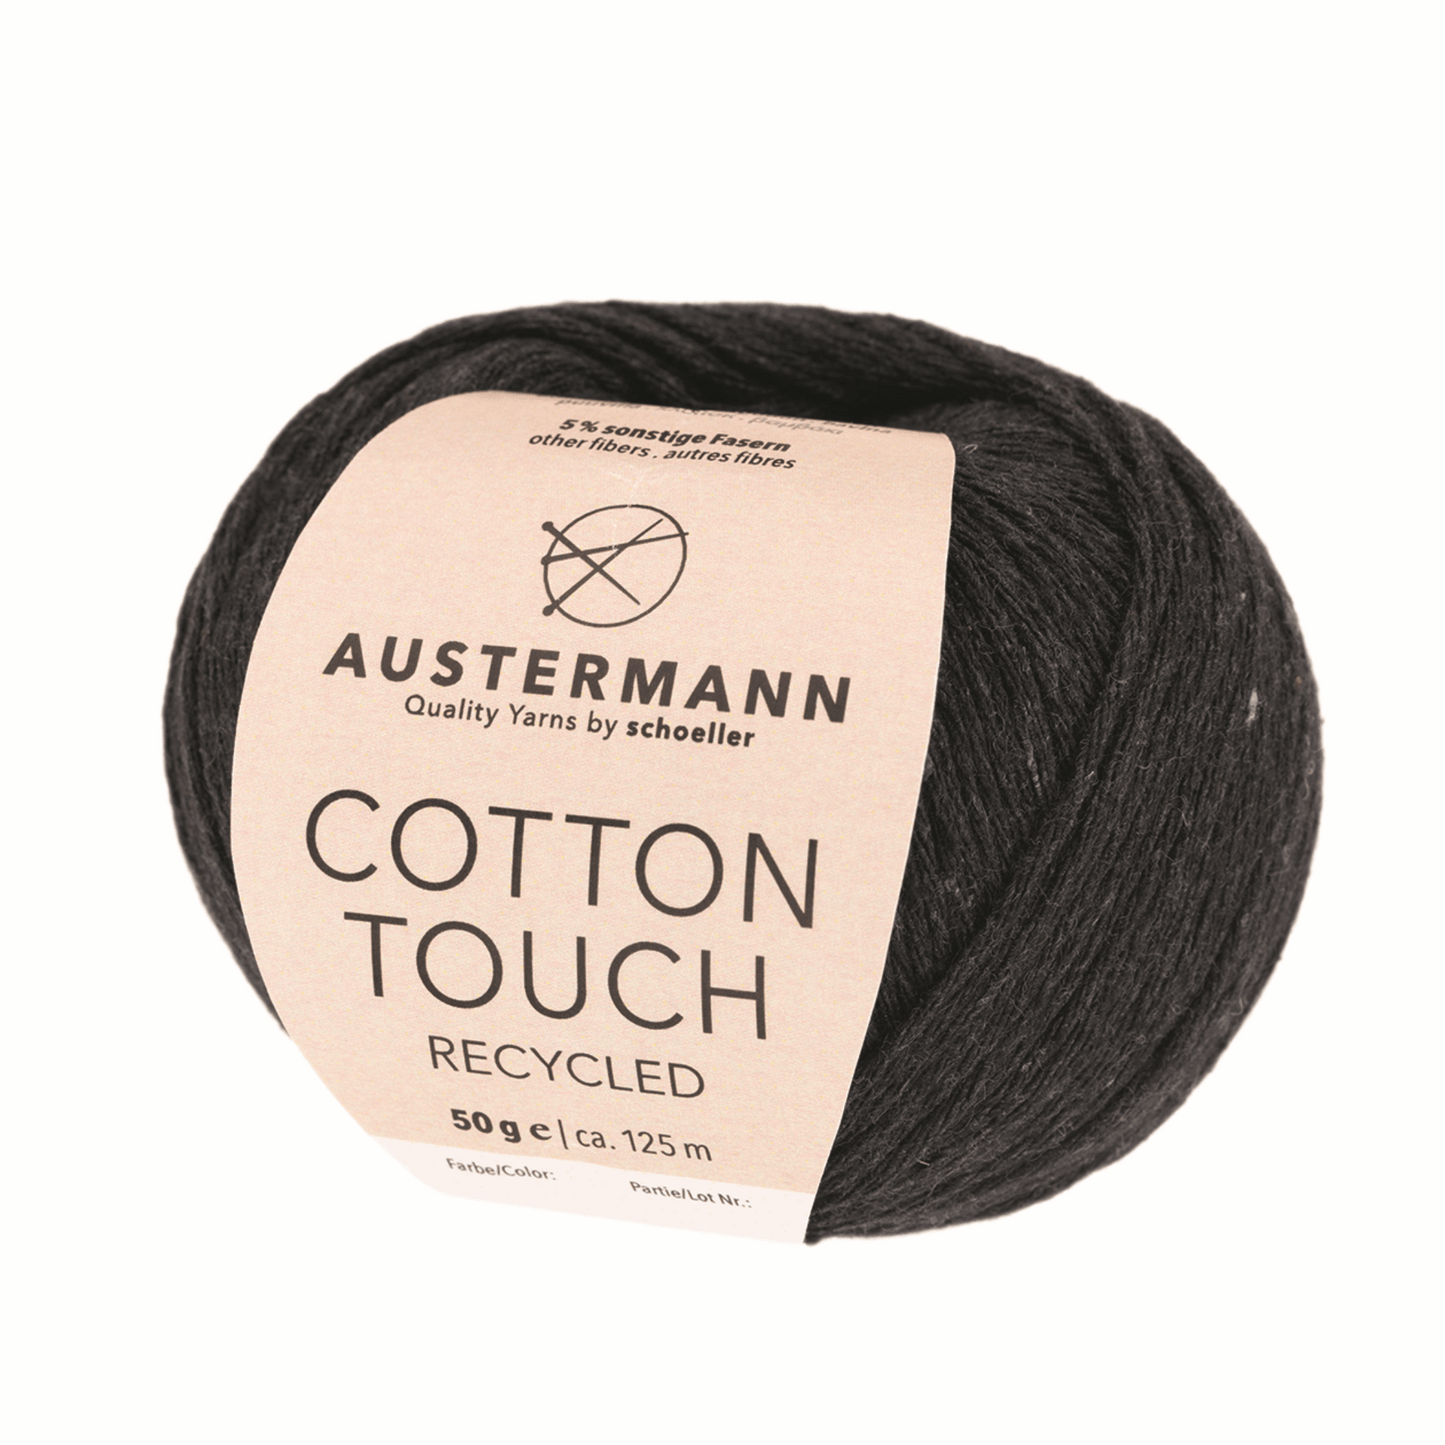 Cotton touch recycled 50g, 90335, color 2, black